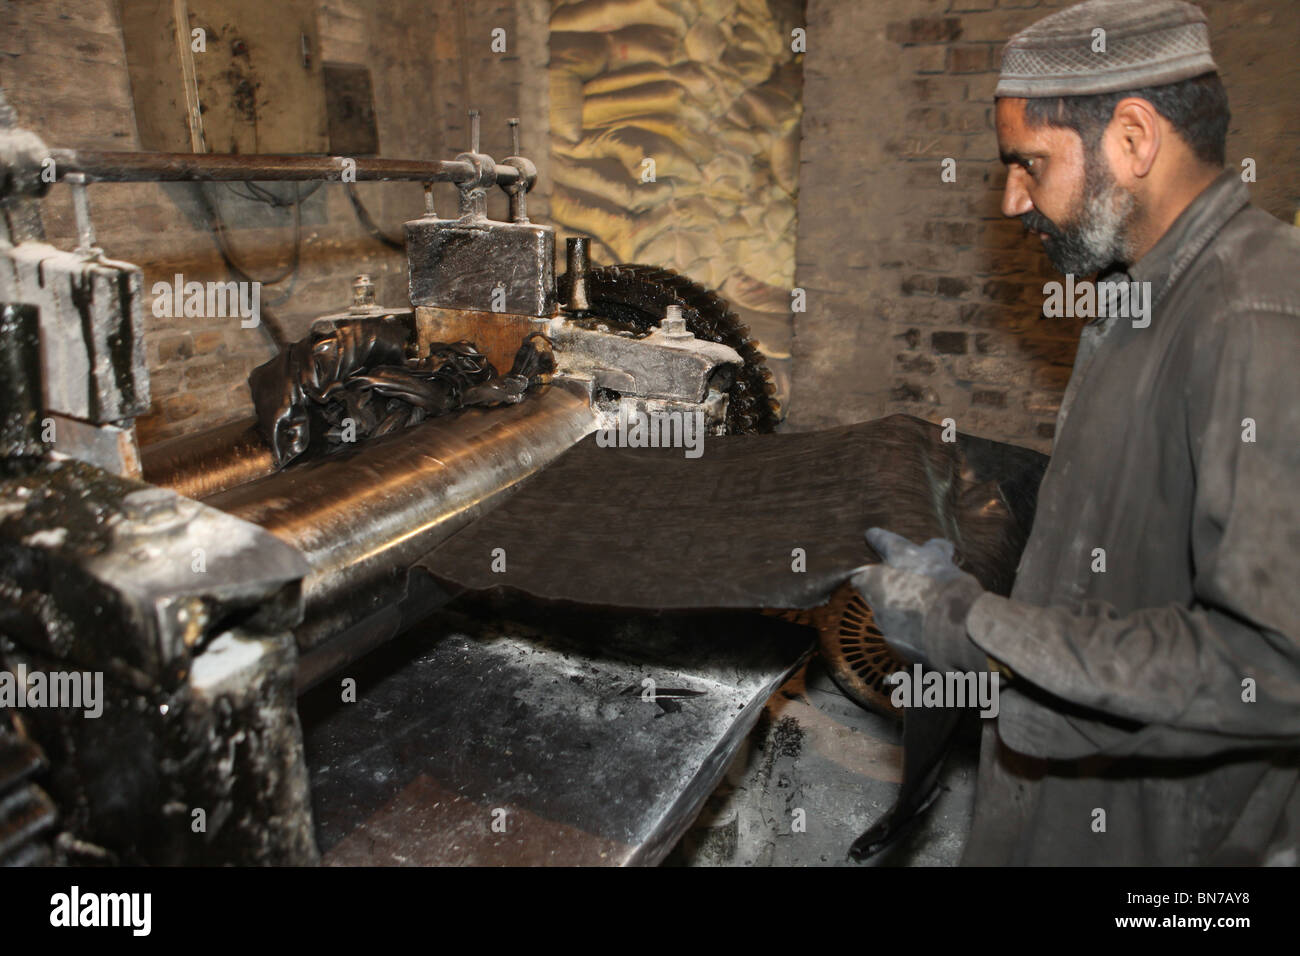 Rubber and pipe factory in islamabad, Pakistan Stock Photo